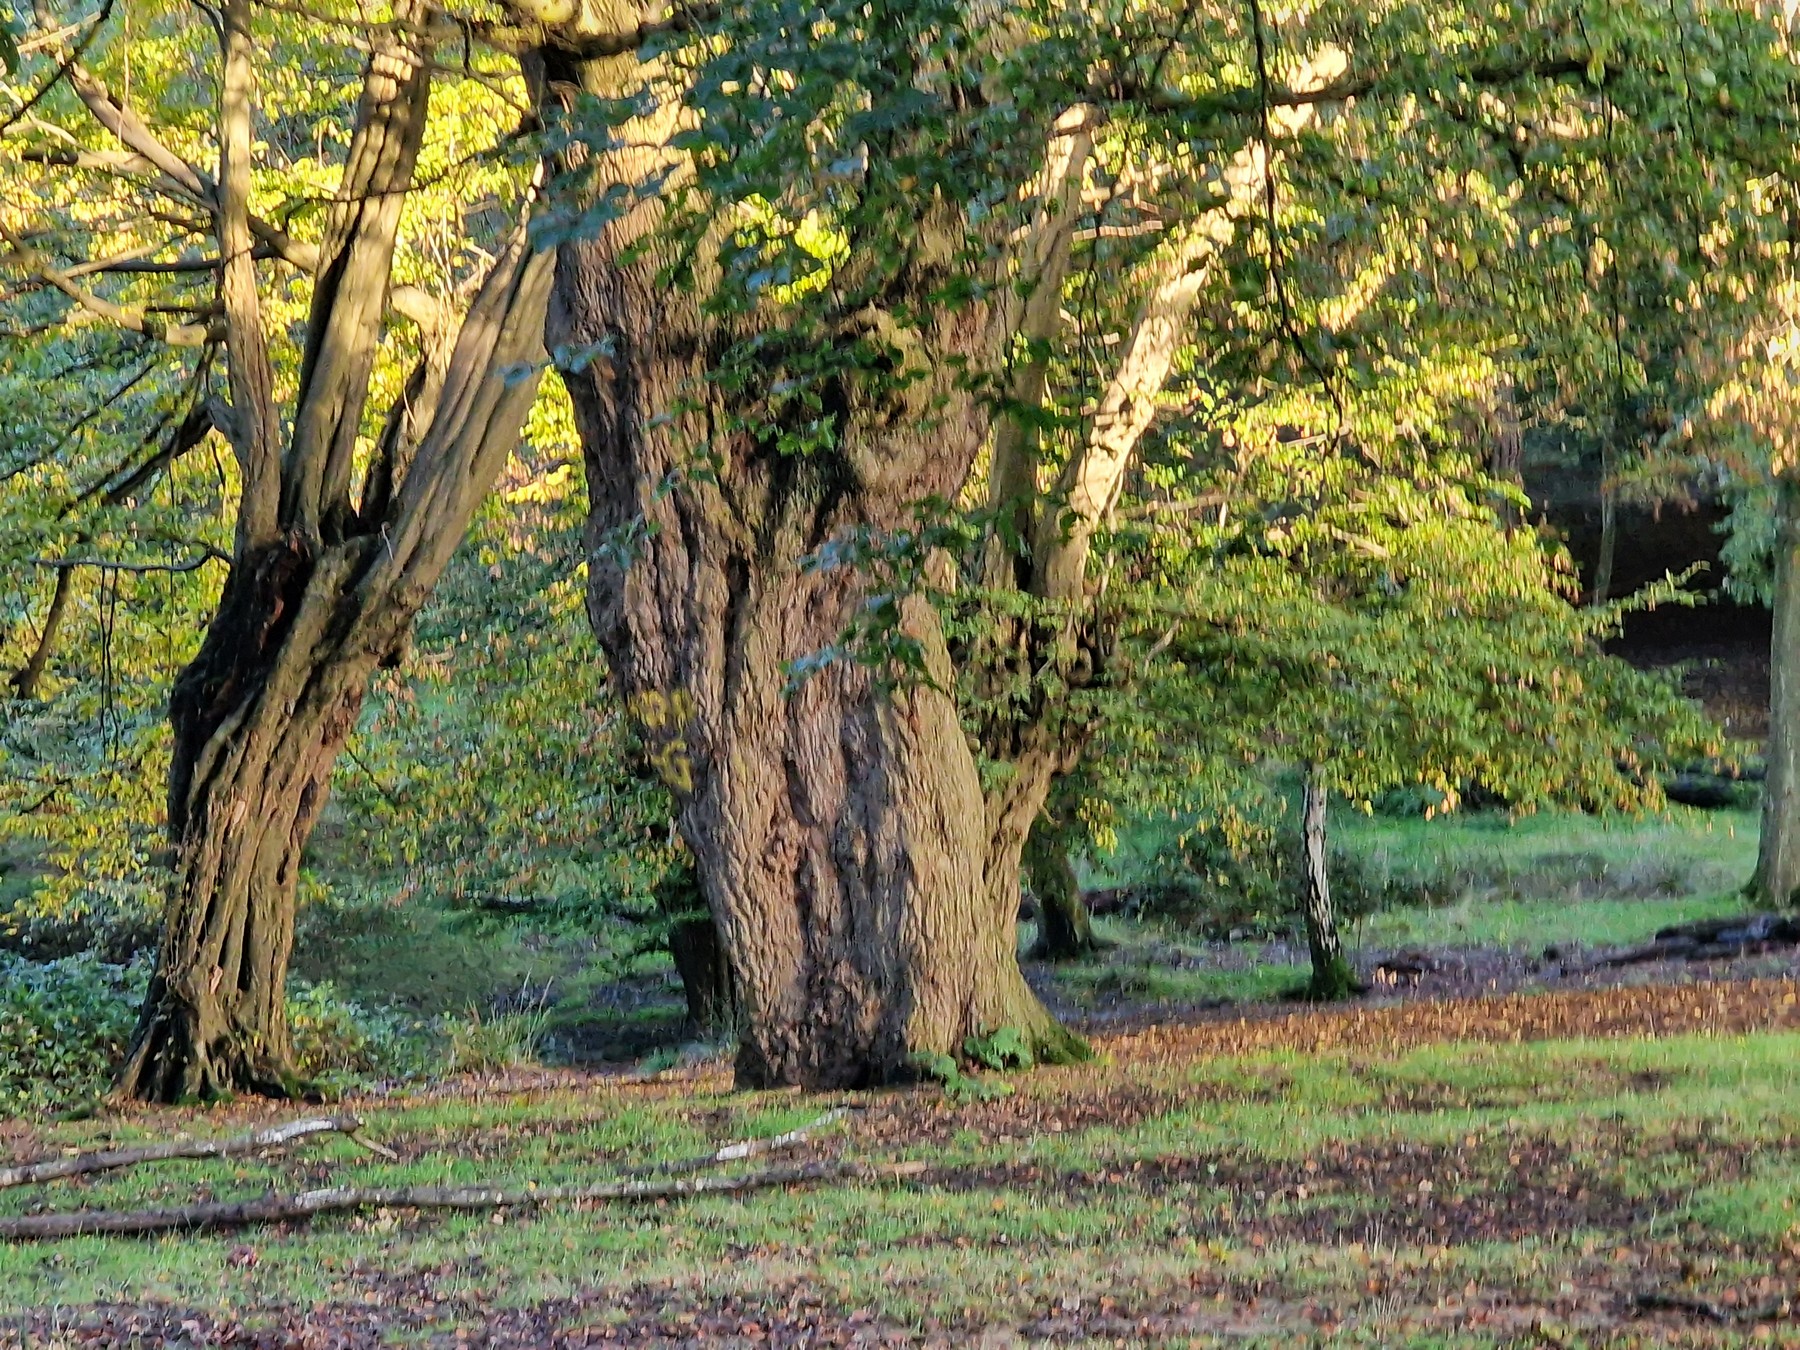 Ancient beech trees at Epping Forest